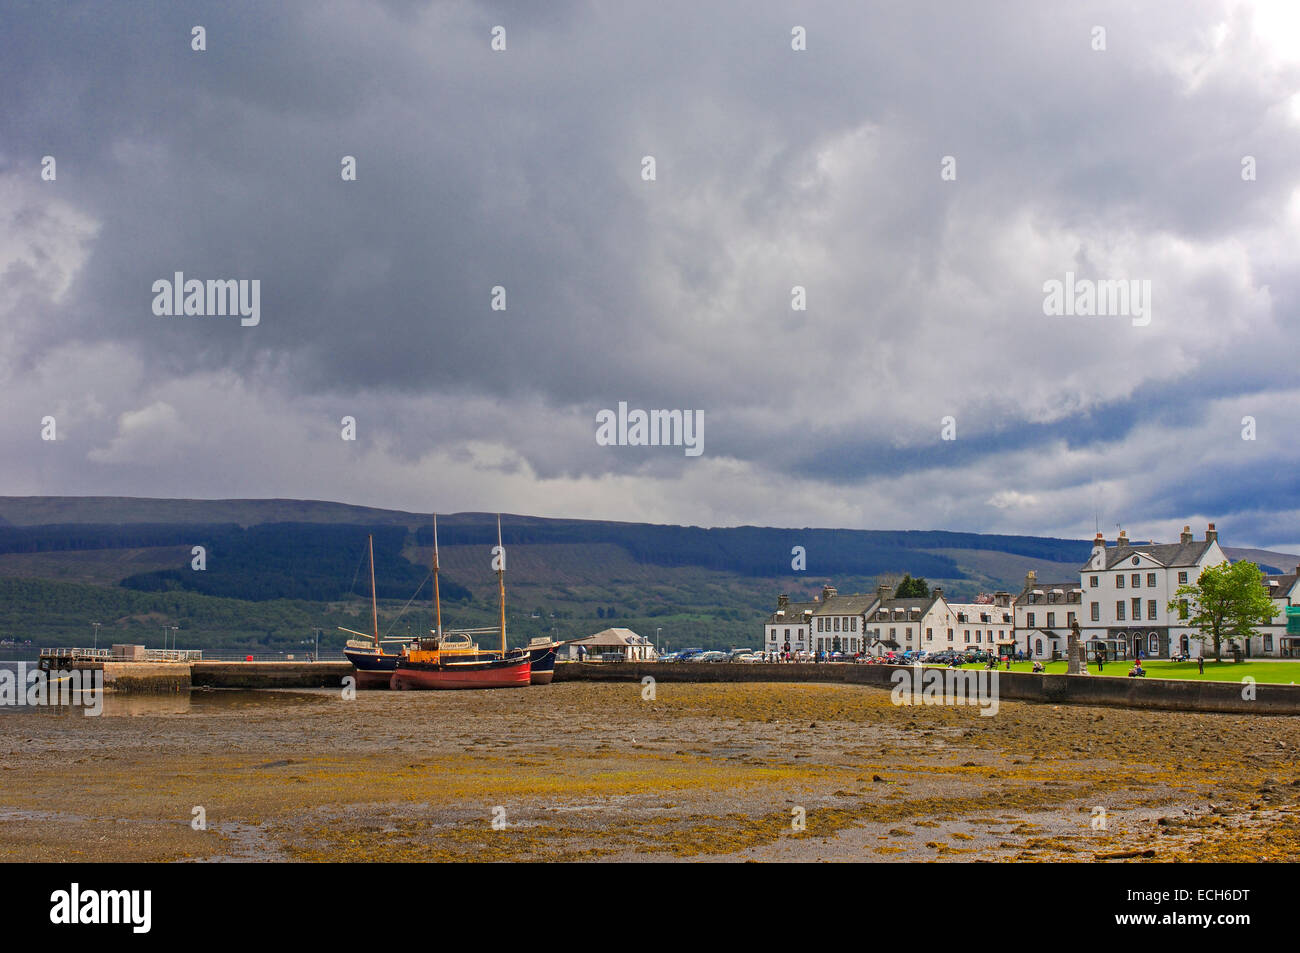 Le Loch Fyne, Inveraray, Argyll and Bute, Ecosse, Royaume-Uni, Europe Banque D'Images